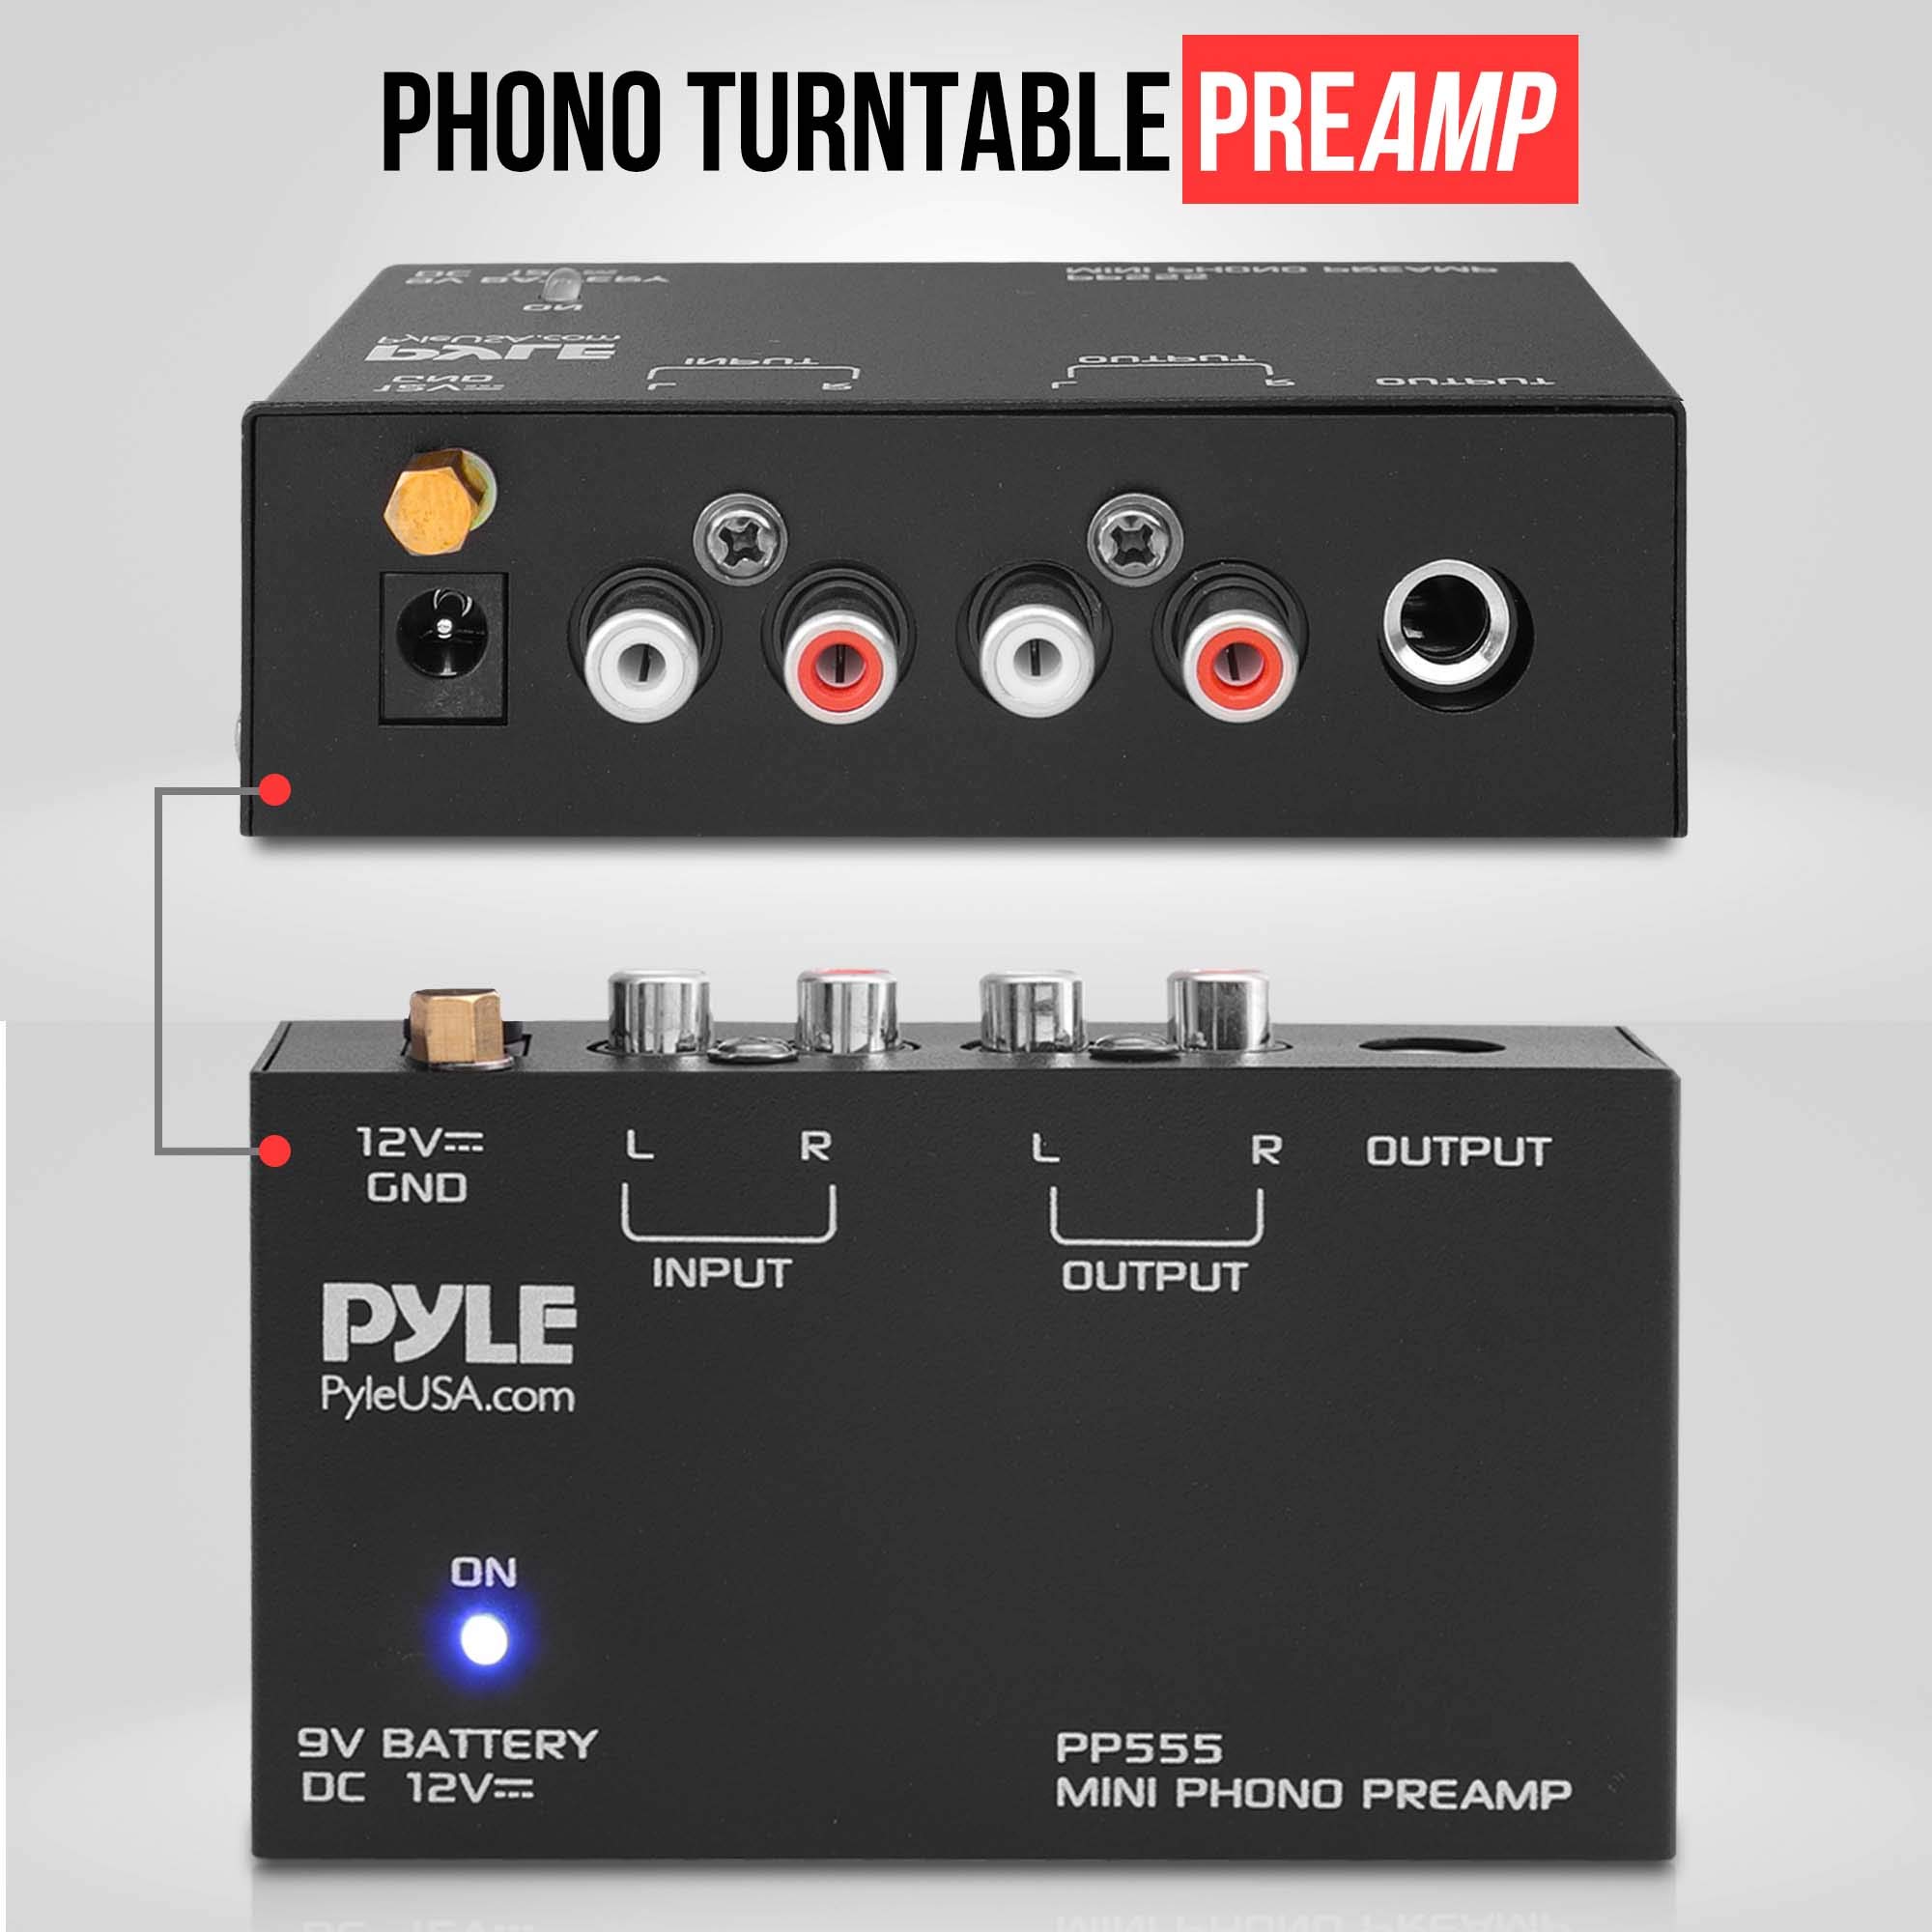 Pyle Phono Turntable Preamp - Mini Electronic Audio Stereo Phonograph Preamplifier with 9V Battery Compartment, Separate DC 12V Power Adapter, RCA Input, RCA Output & Low Noise Operation (PP555) BLACK